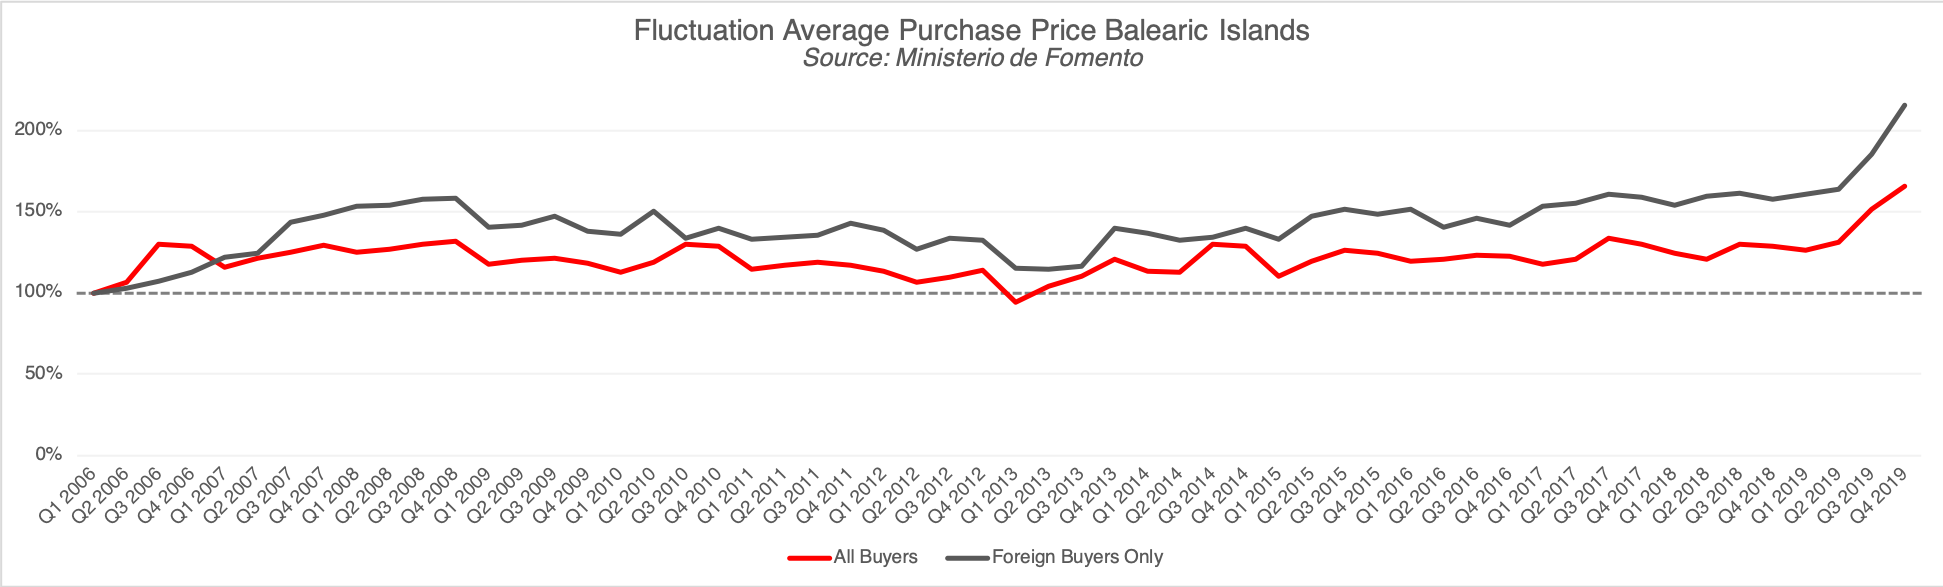 Fluctuation Average Purchase Price Balearic Islands